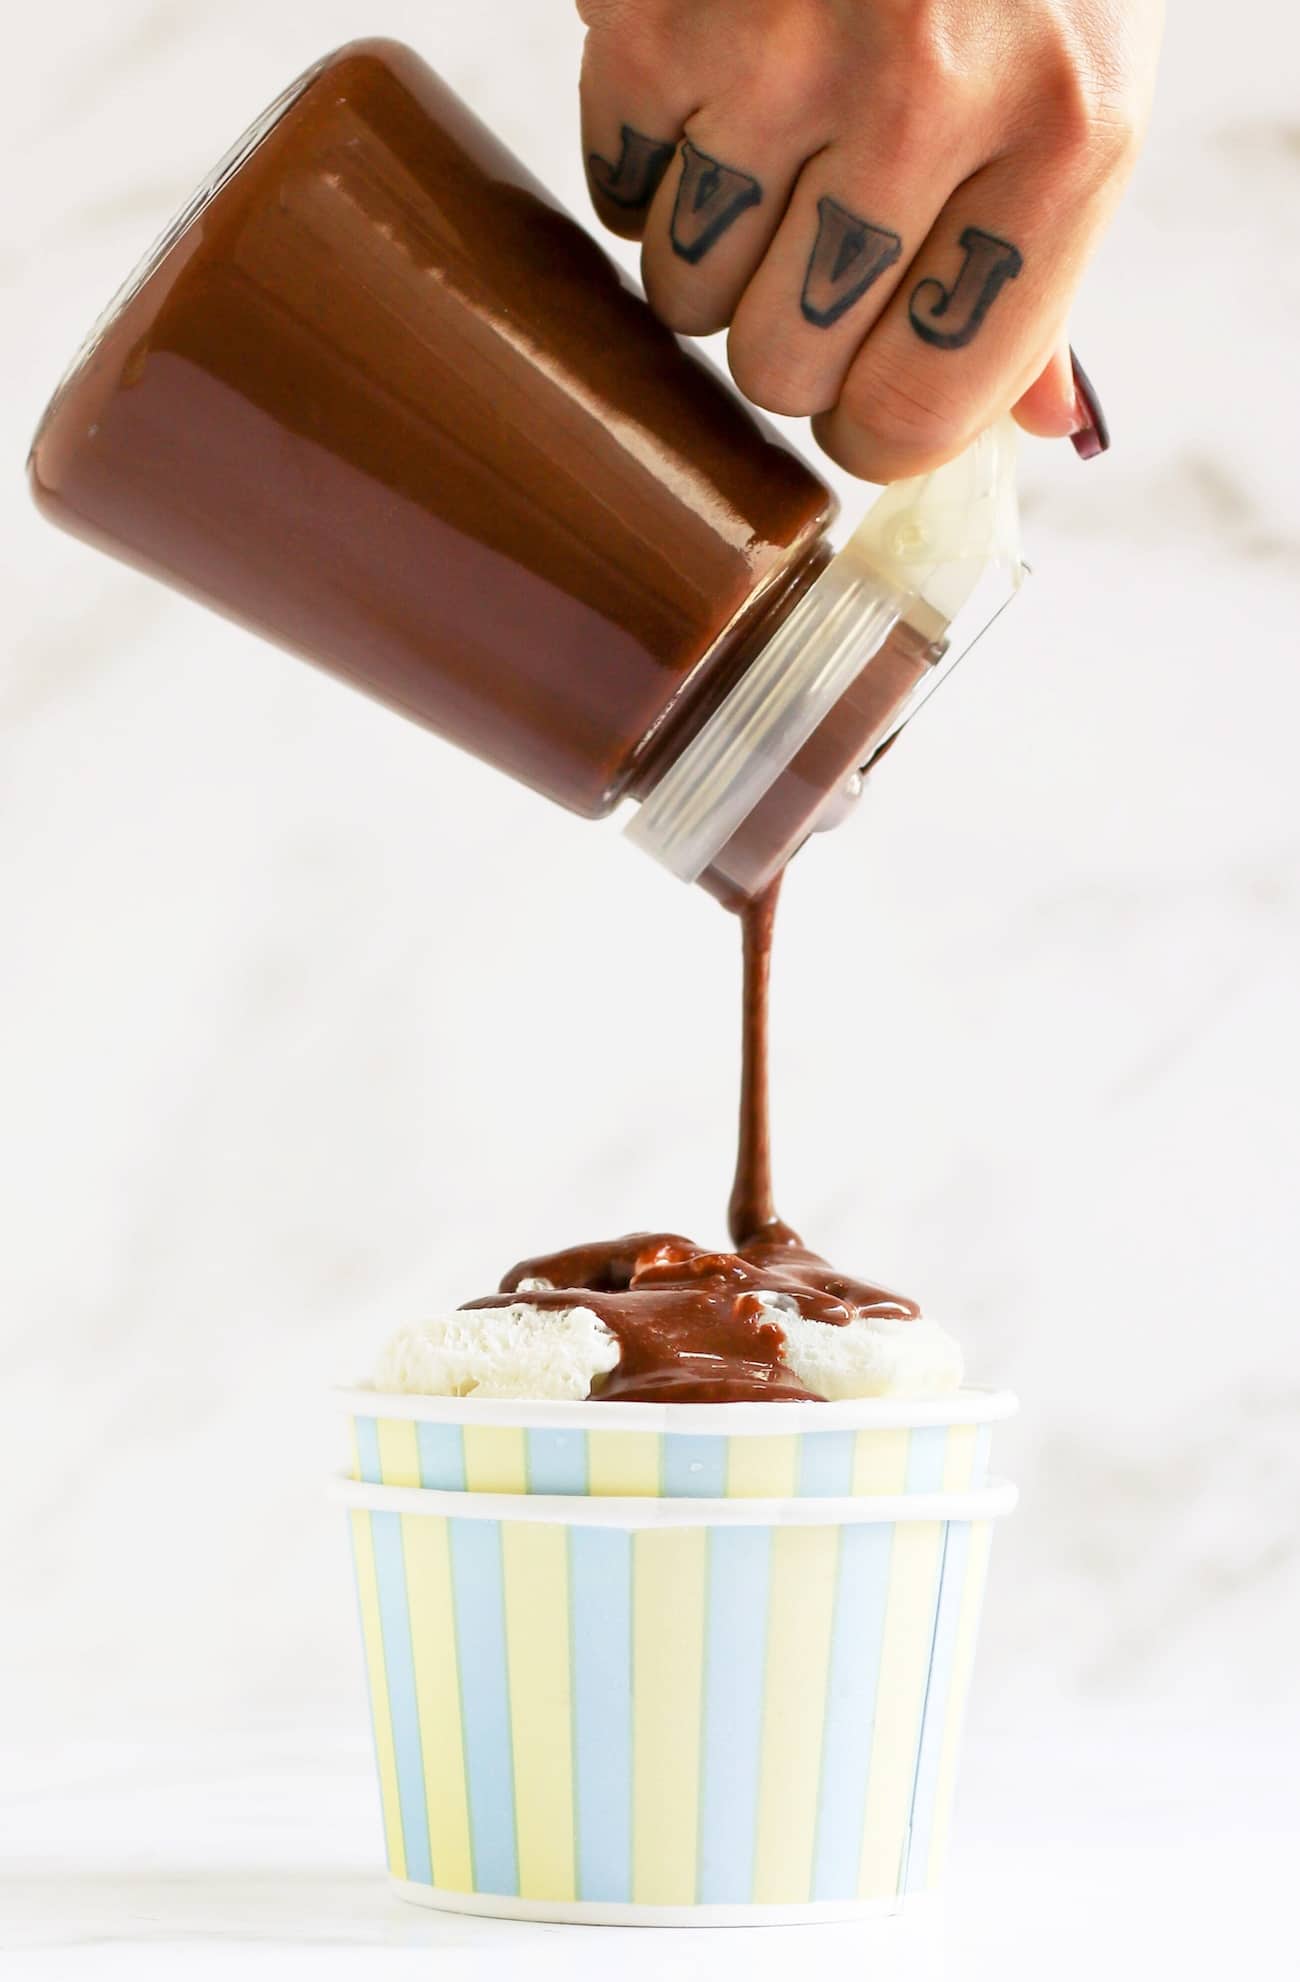 This Healthy Chocolate Fudge Sauce is rich, creamy, and delicious over ice cream, cake, and oatmeal, and mixed into milkshakes and trifles! Made with healthier ingredient swaps, this Hot Fudge Sauce is sugar free, low carb, low fat, and gluten free. Perfect as a potluck dessert topping, a homemade gift for birthdays and parties, and a pantry staple just for you.